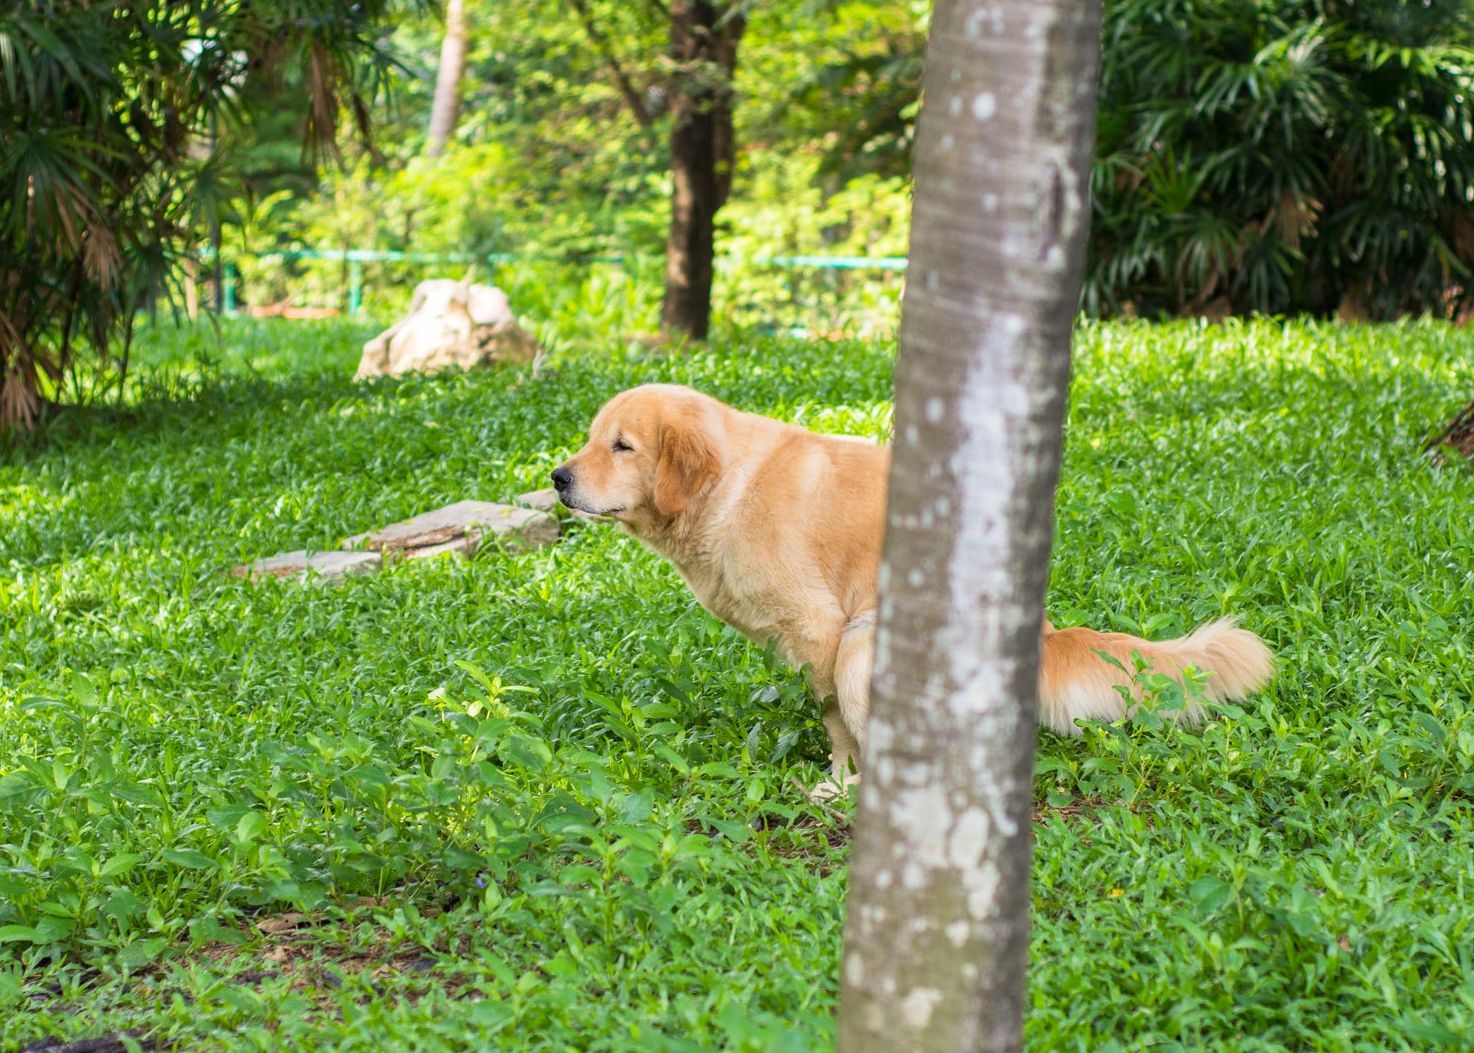 Golden Retriever pooping behind a tree